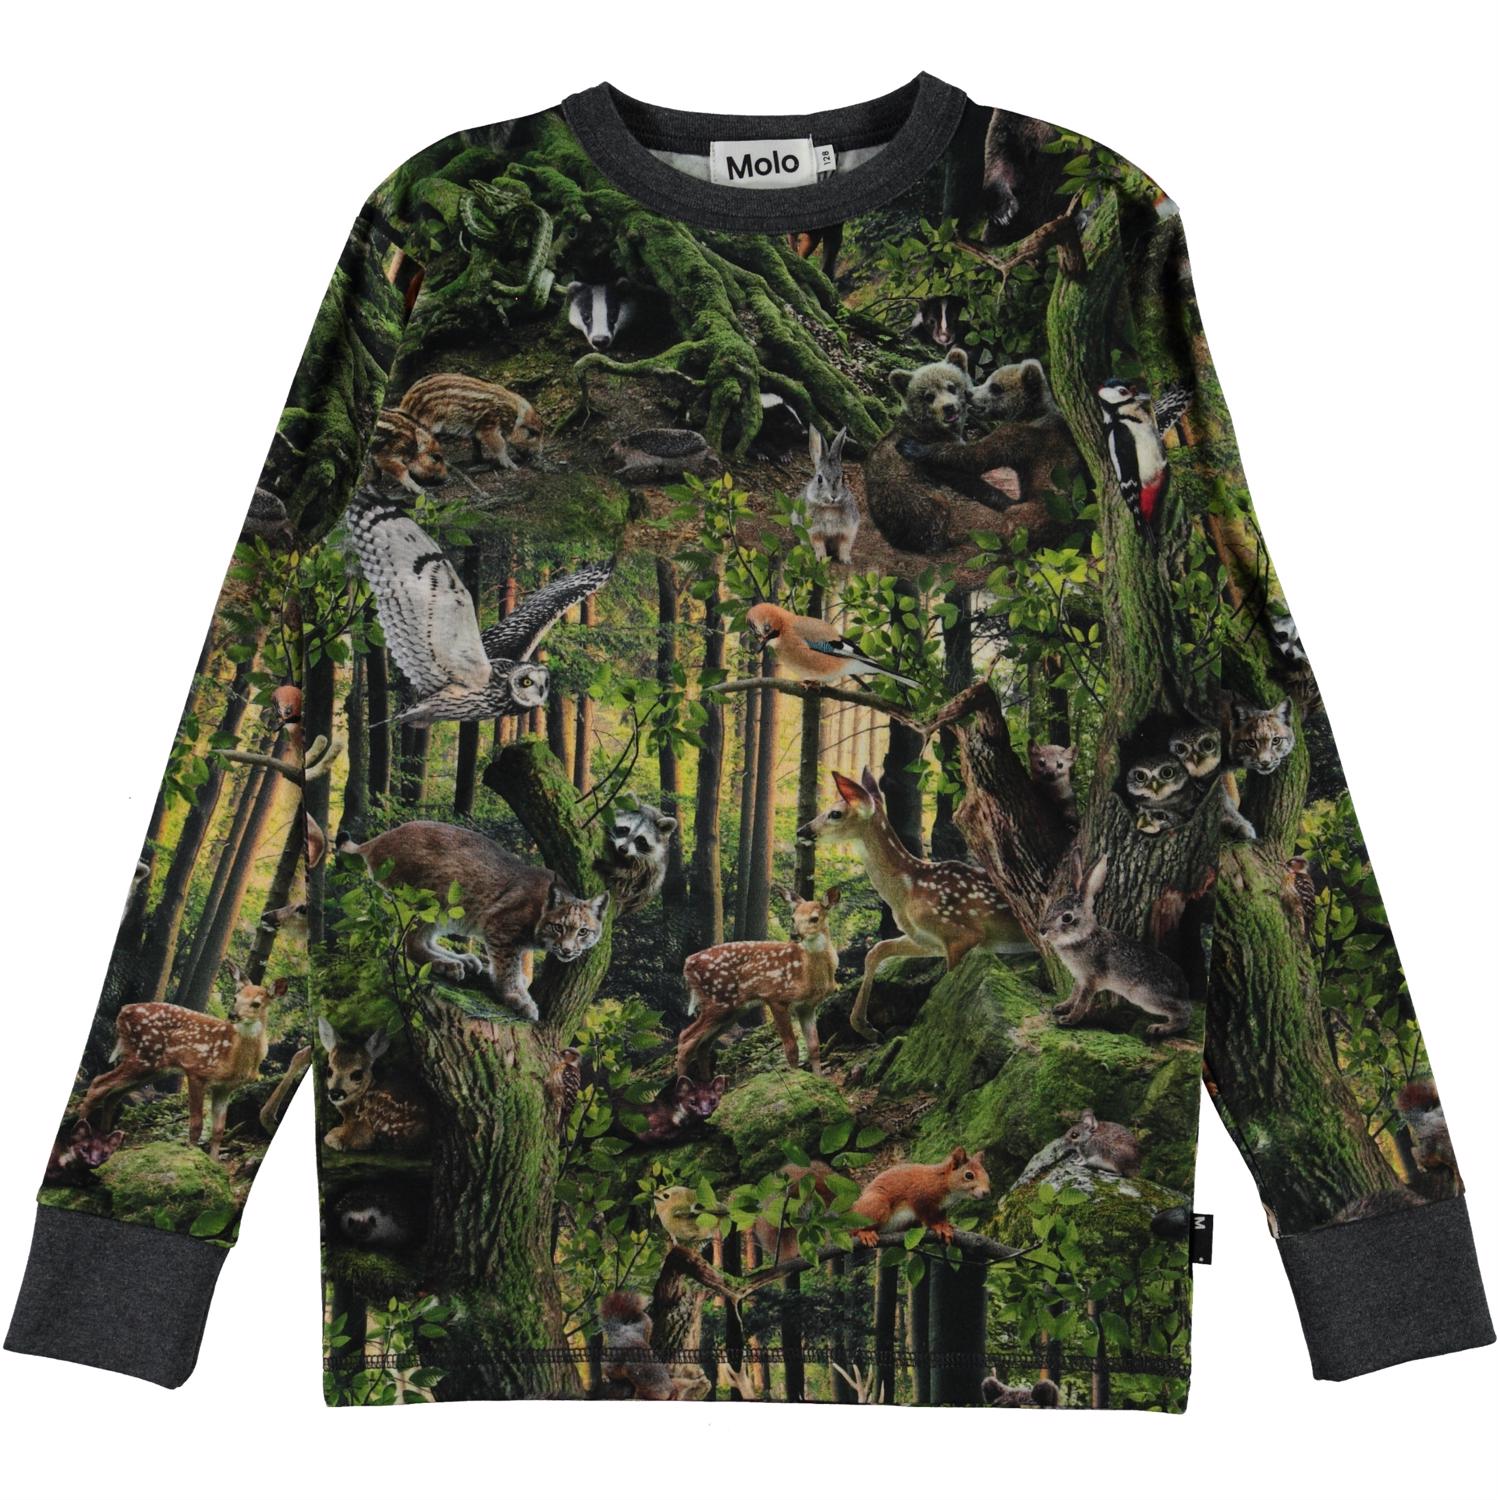 Molo Rill Long Sleeve t- Shirt - Forest Life